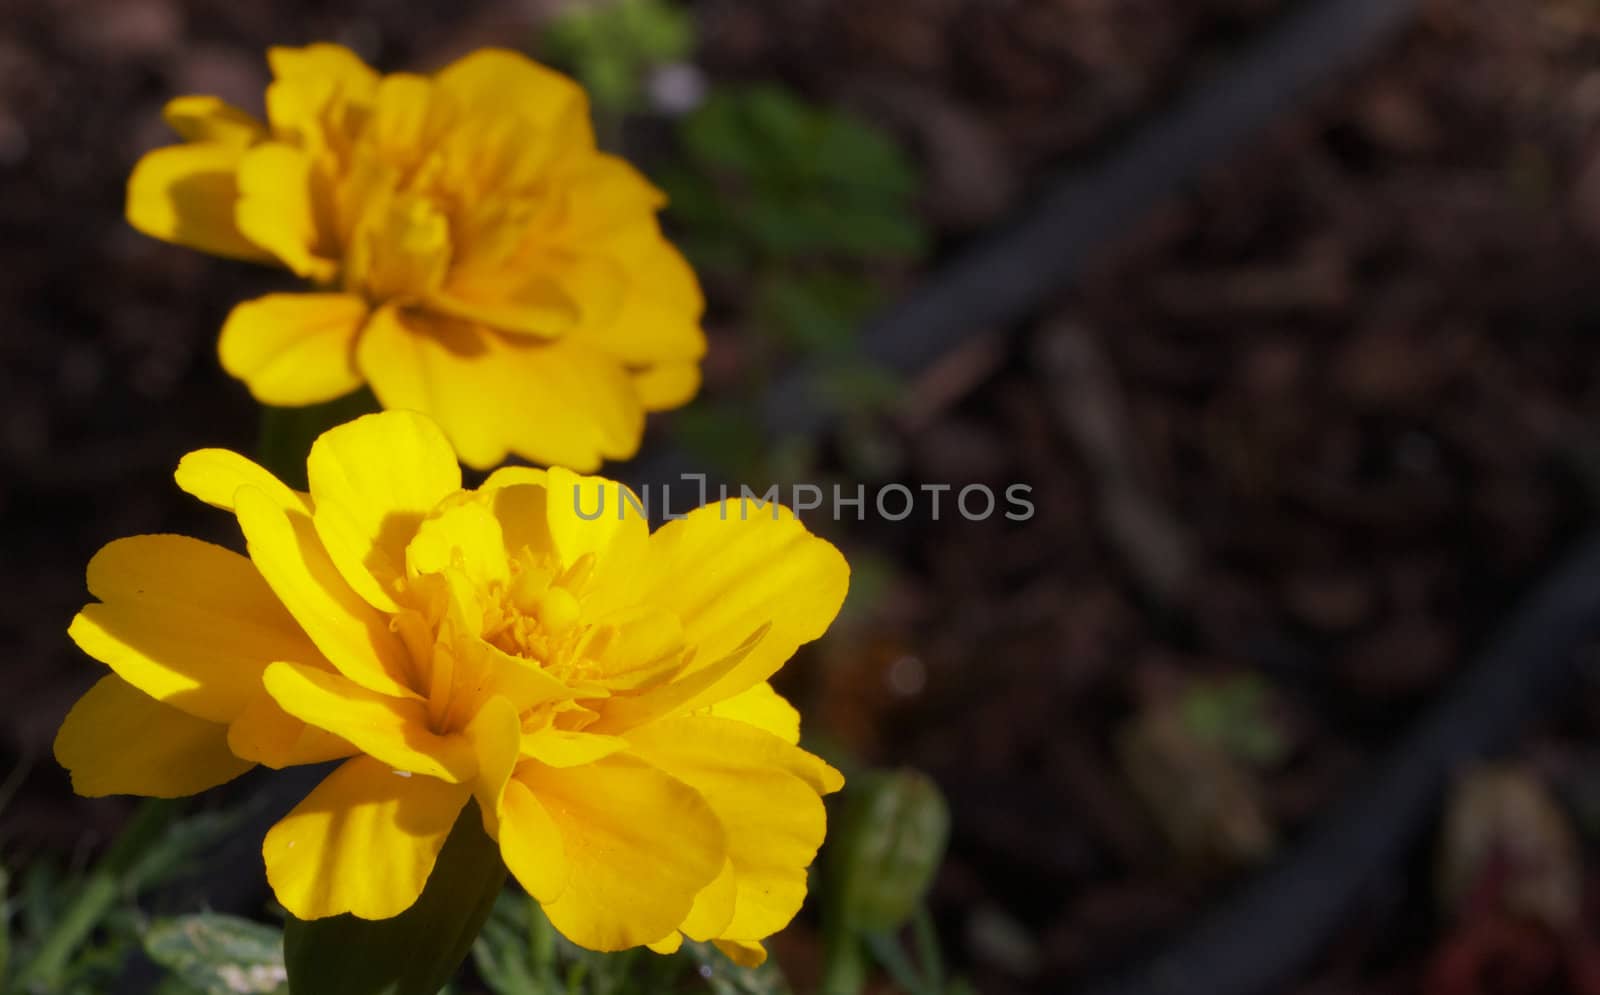 Bright yellow flowers one on focus the other soft with a dark soft focus backgroun